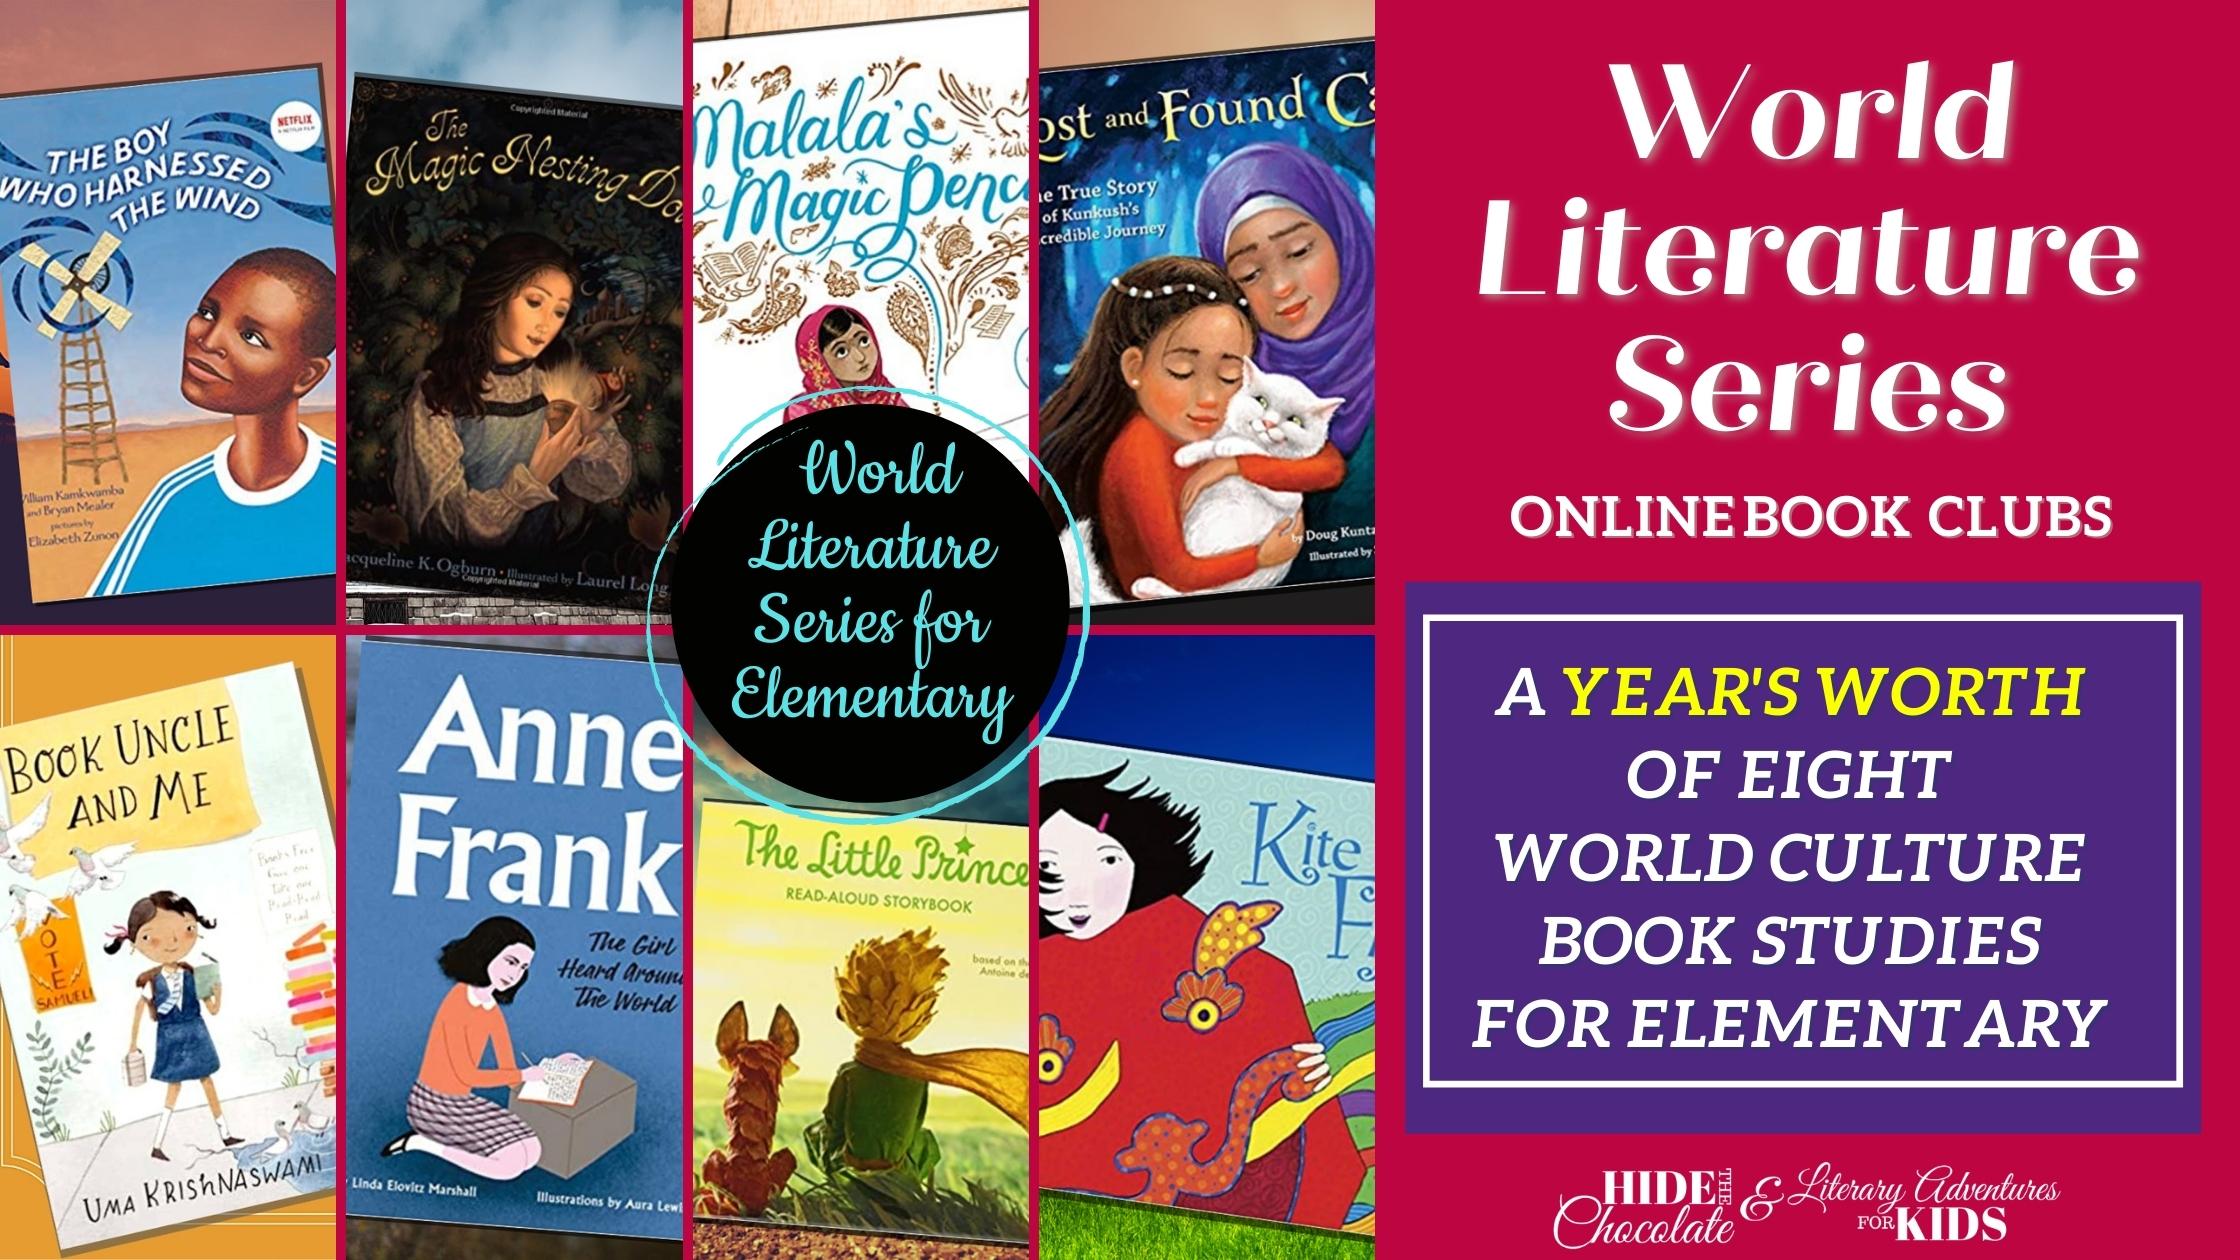 World Literature Series for Elementary